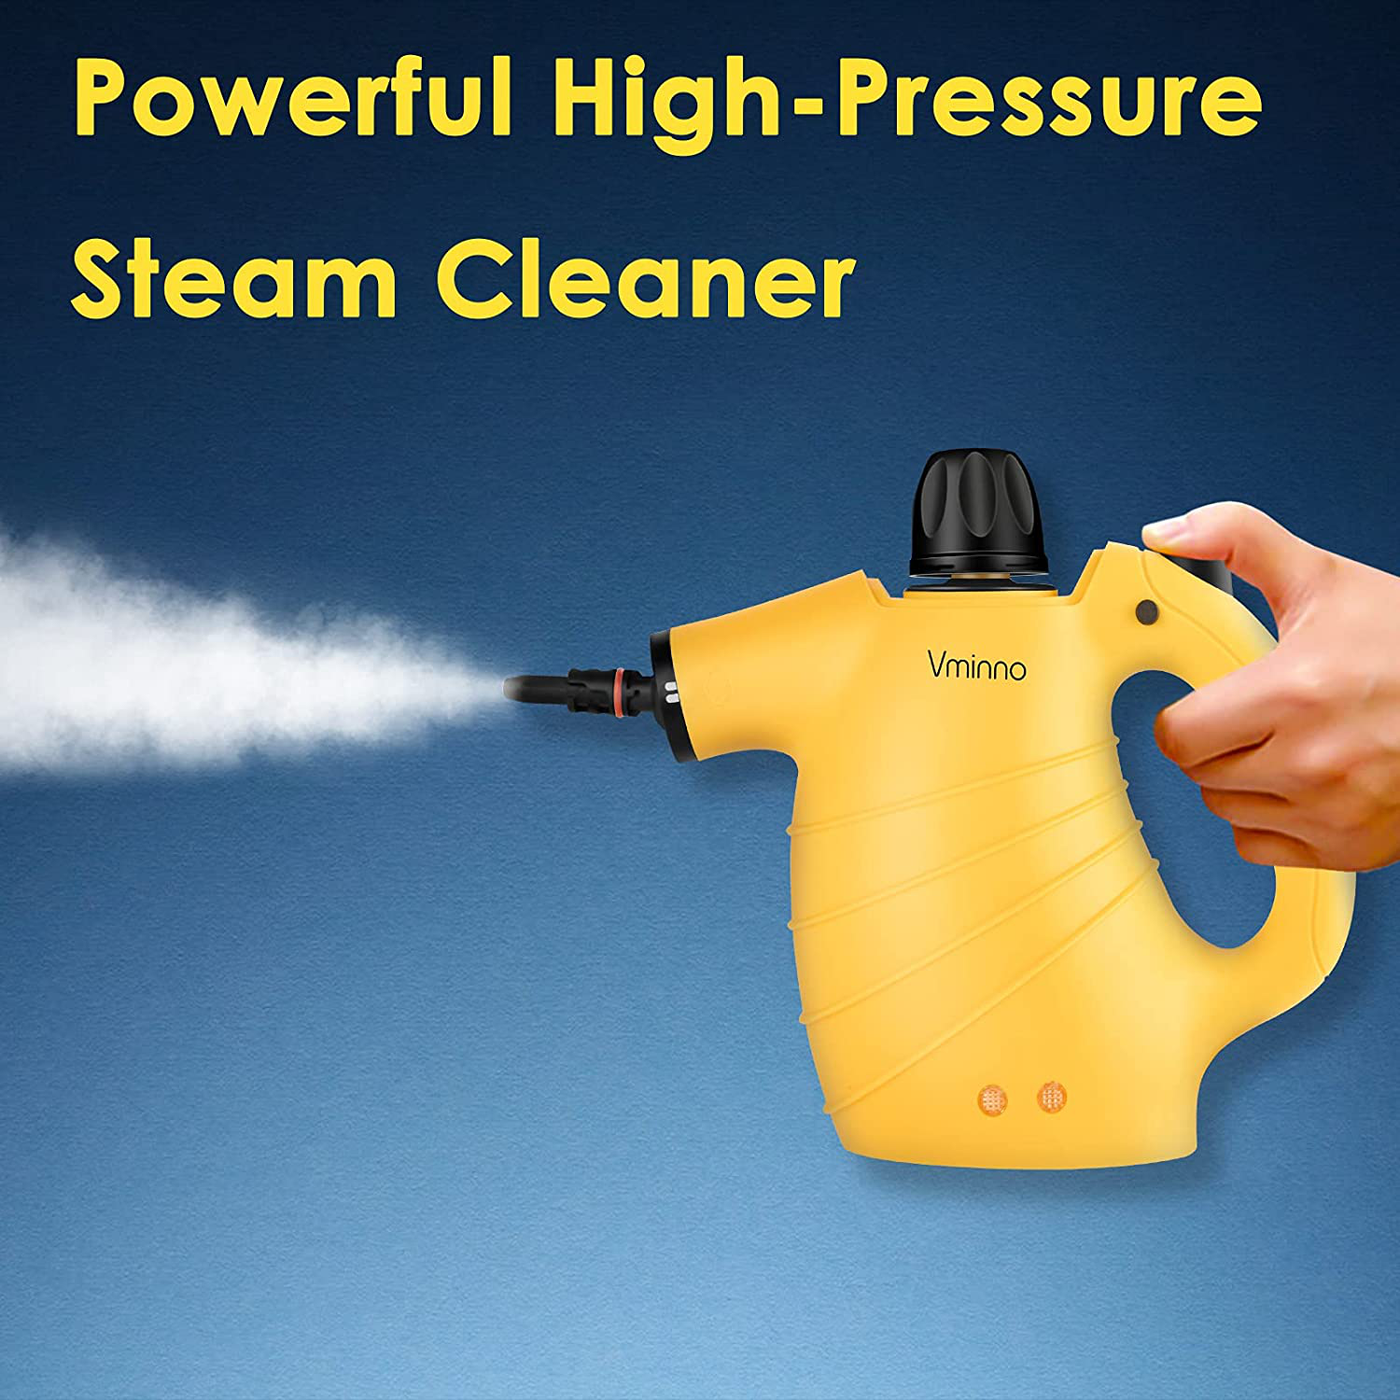 Handheld Steam Cleaner, 450ml Large Capacity Steam Cleaning with Extension Hose, Upholstery Steamer Cleaner, Floor Cleaner, Car Steamer for Hard Surface Cleaning, Floor Gap, Grime, Grease and More